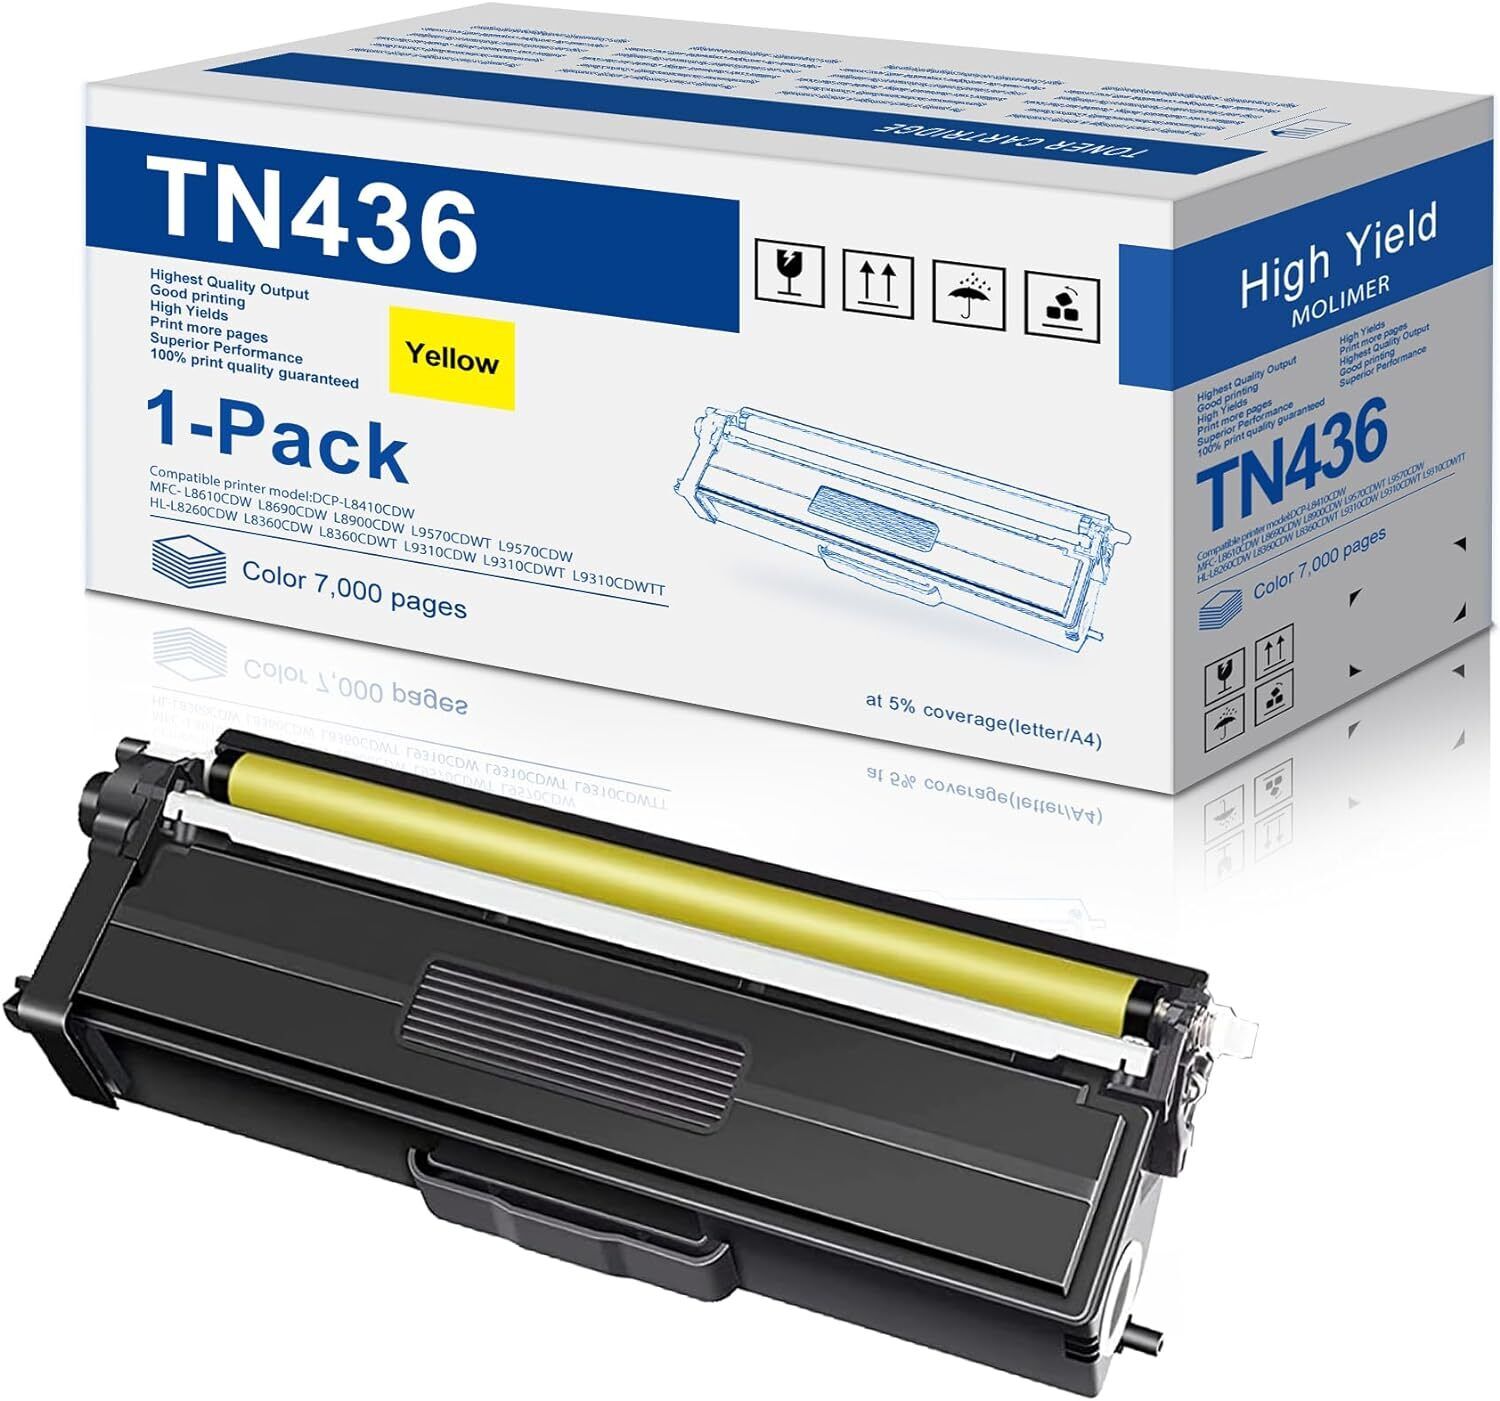 TN436 Toner Cartridge Replacement for Brother MFC-L8900CDW Printer Yellow